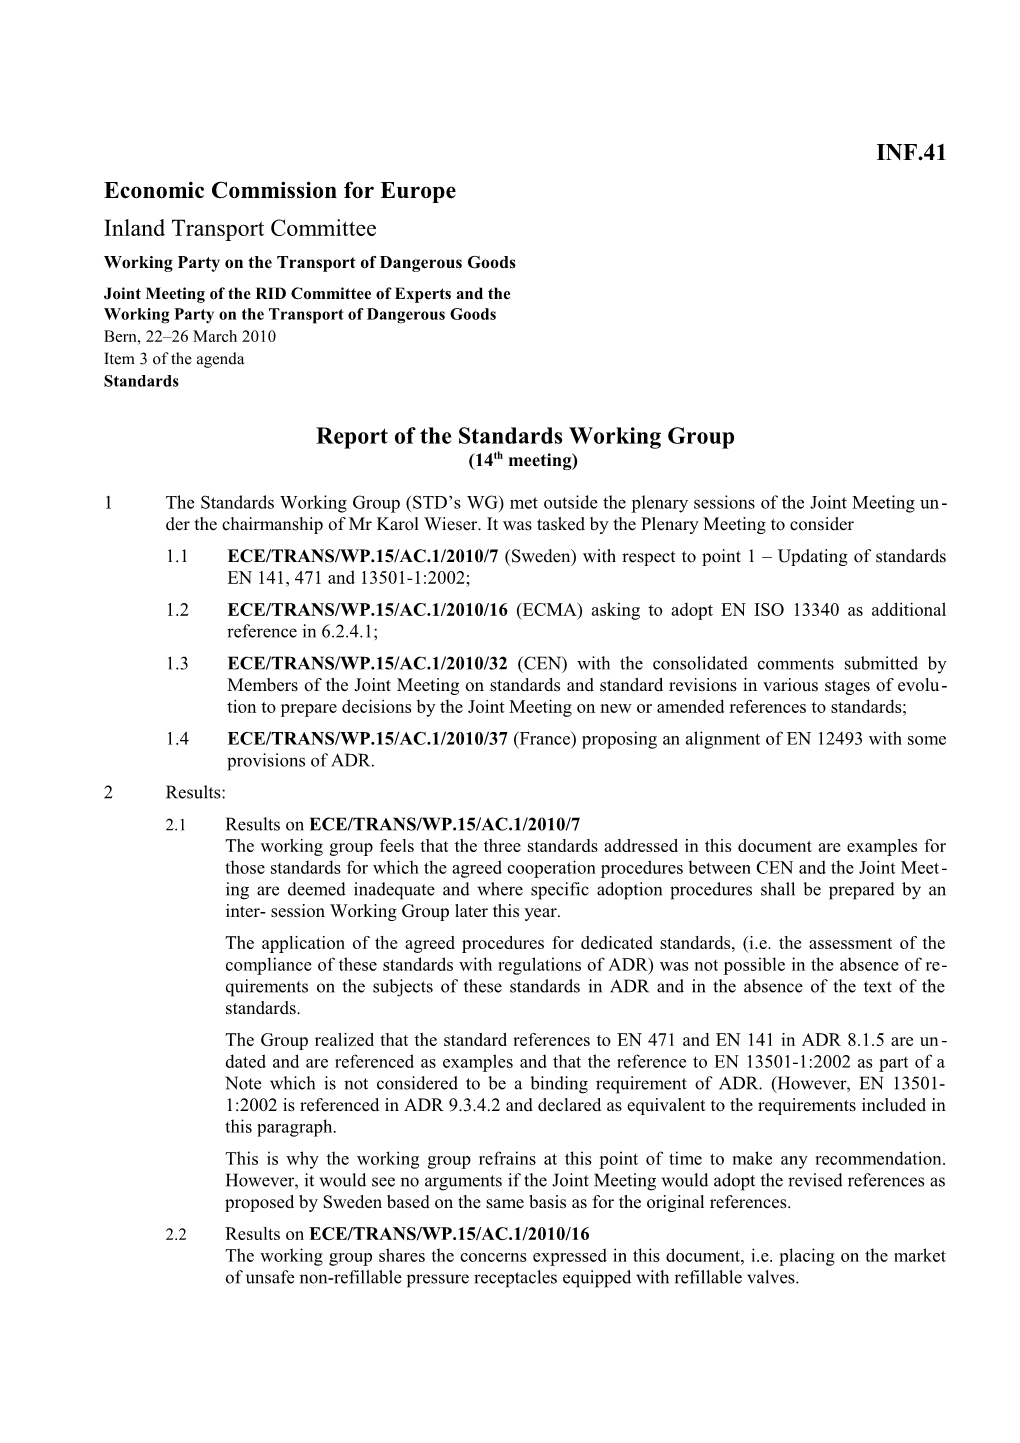 Report of the Standards Working Group (2)